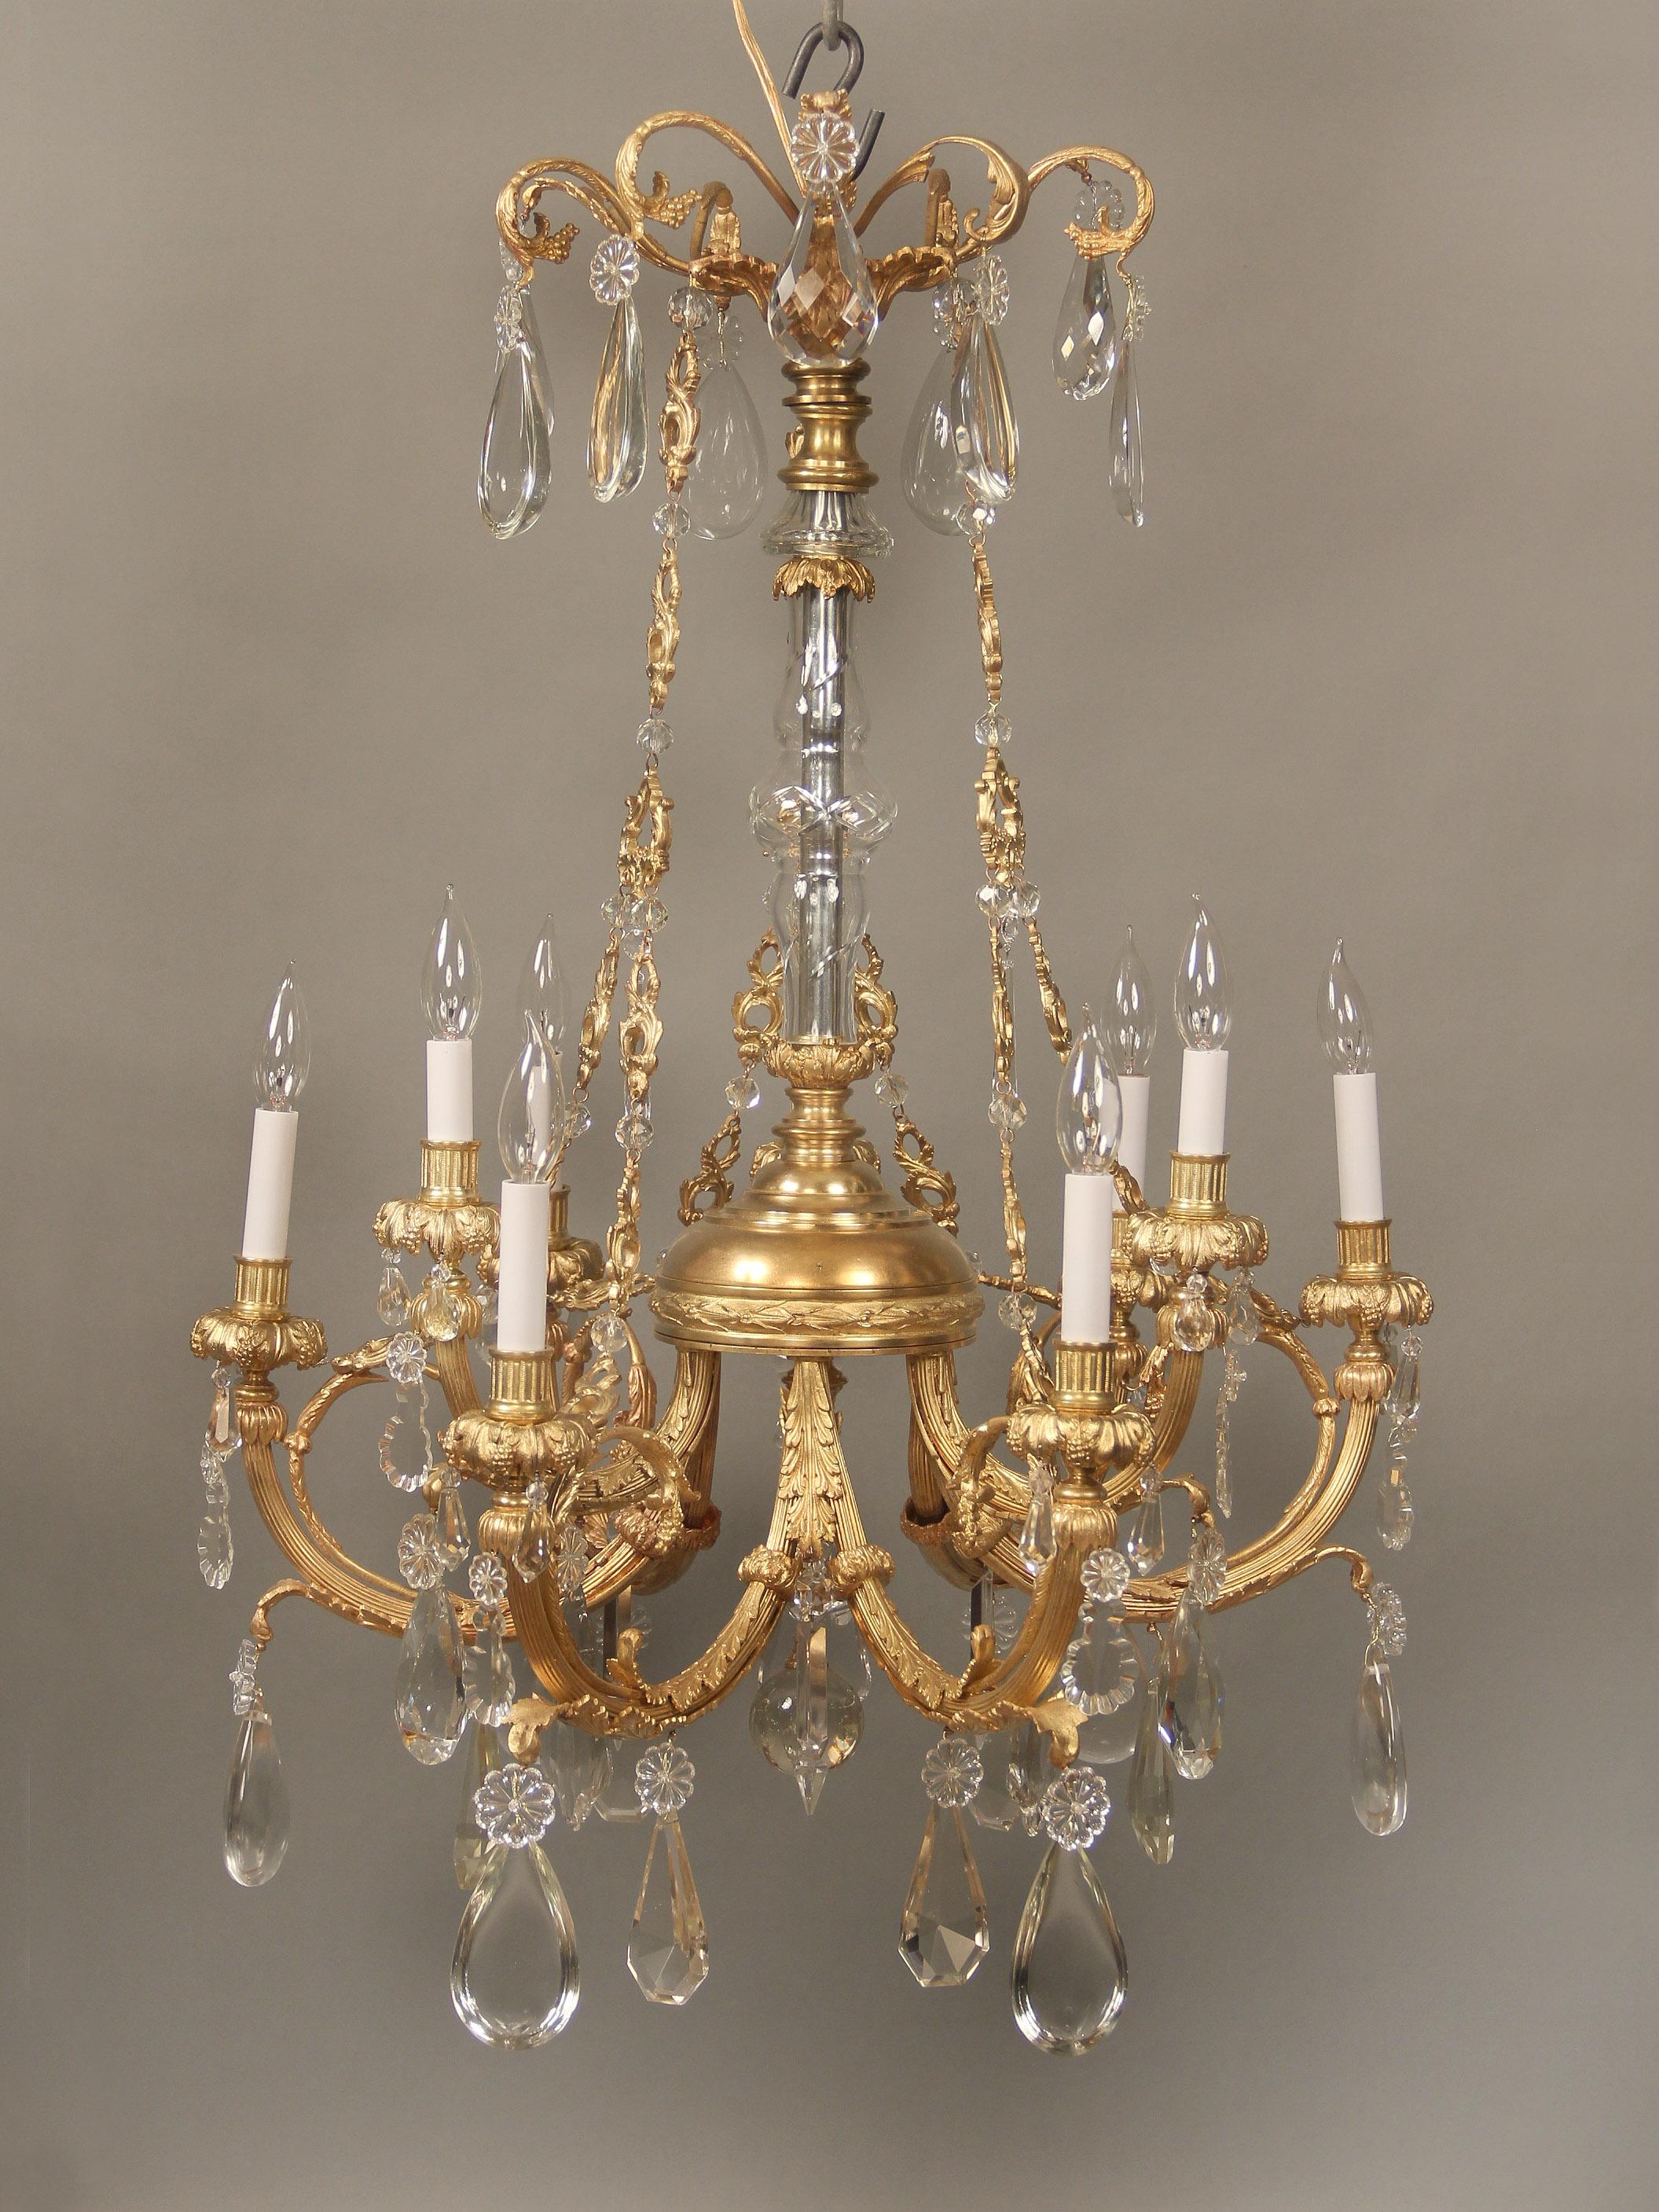 A nice late 19th century gilt bronze and crystal nine light chandelier

Multifaceted and shaped crystal including half pear designs, cut crystal central column, sculpted bronze chains connecting the crown and body, nine perimeter lights.